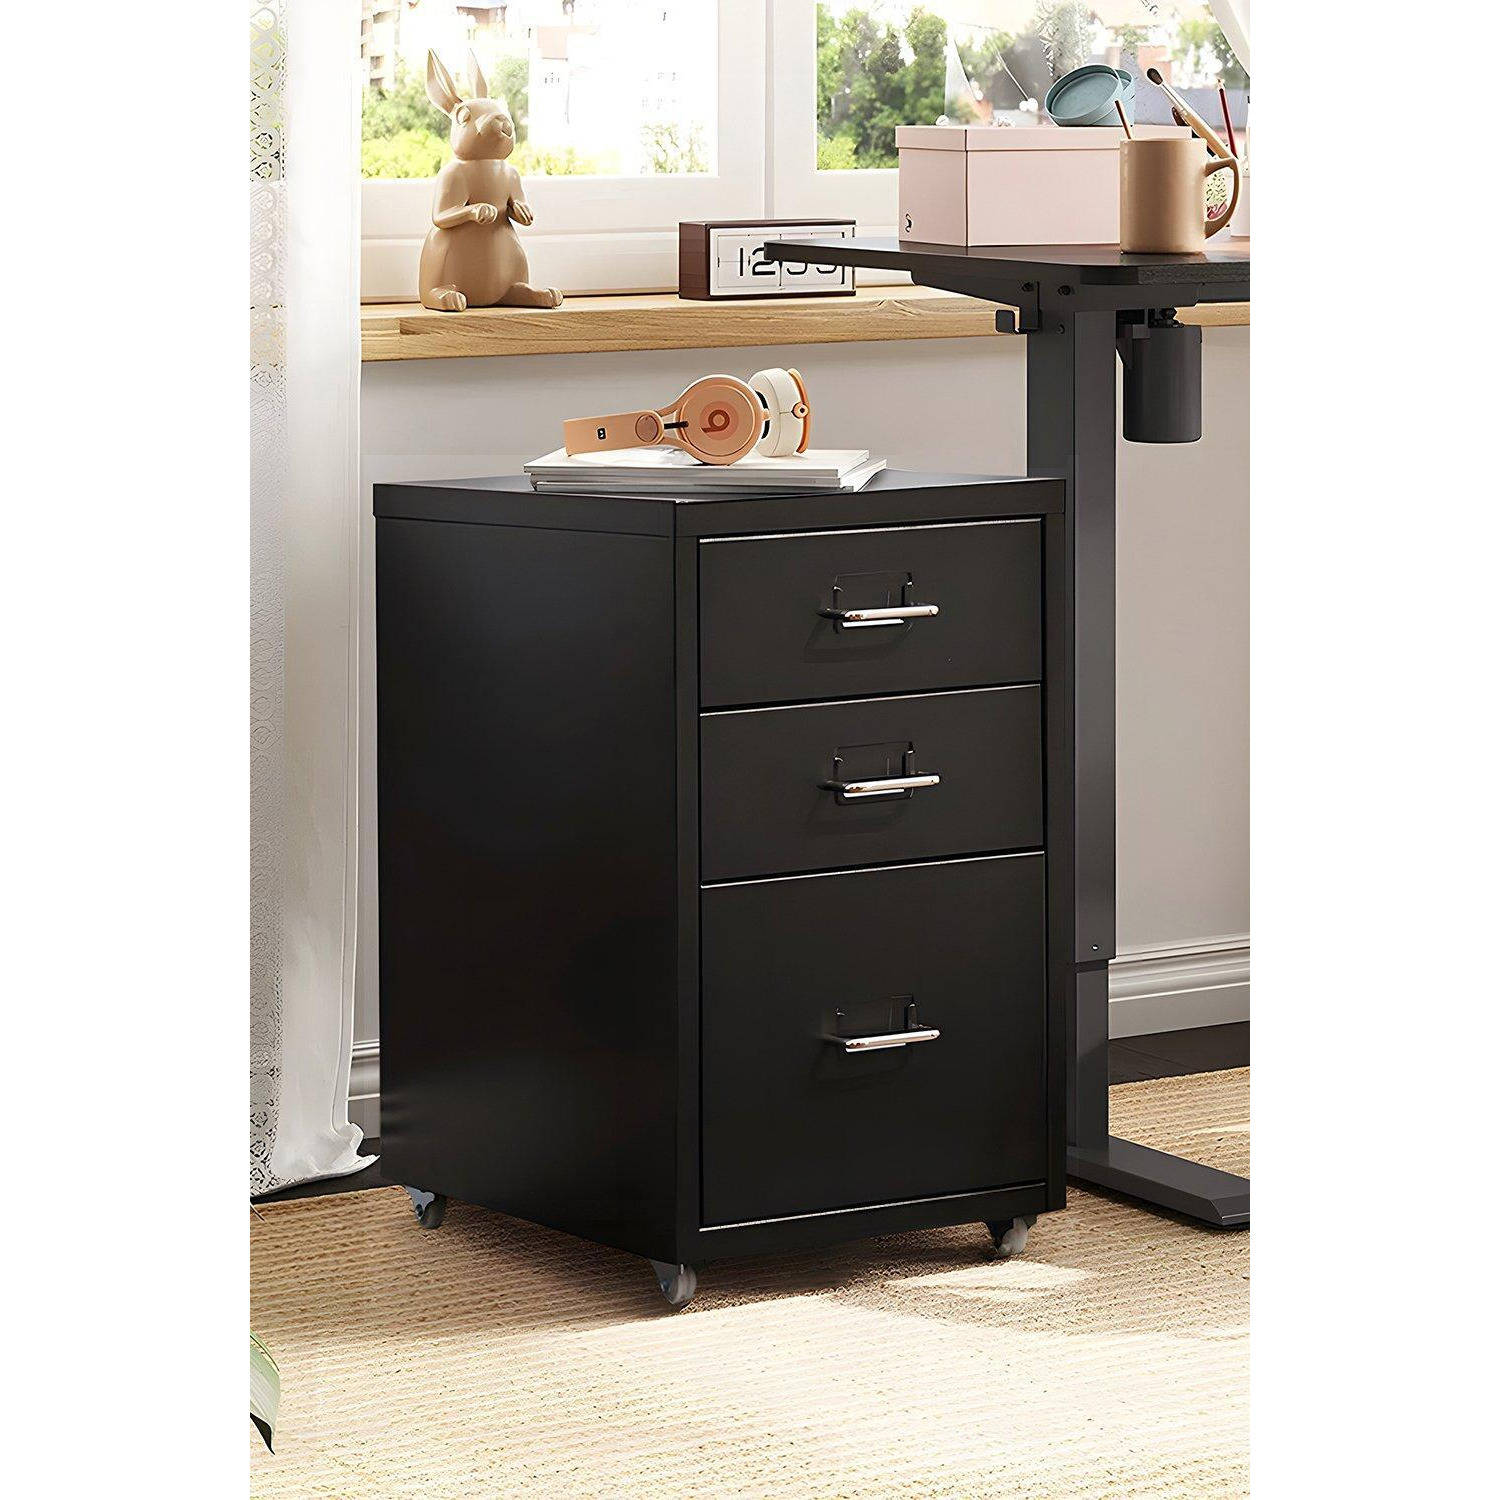 Vertical File Office Cabinet with Wheels Bedroom Bedside Table - image 1